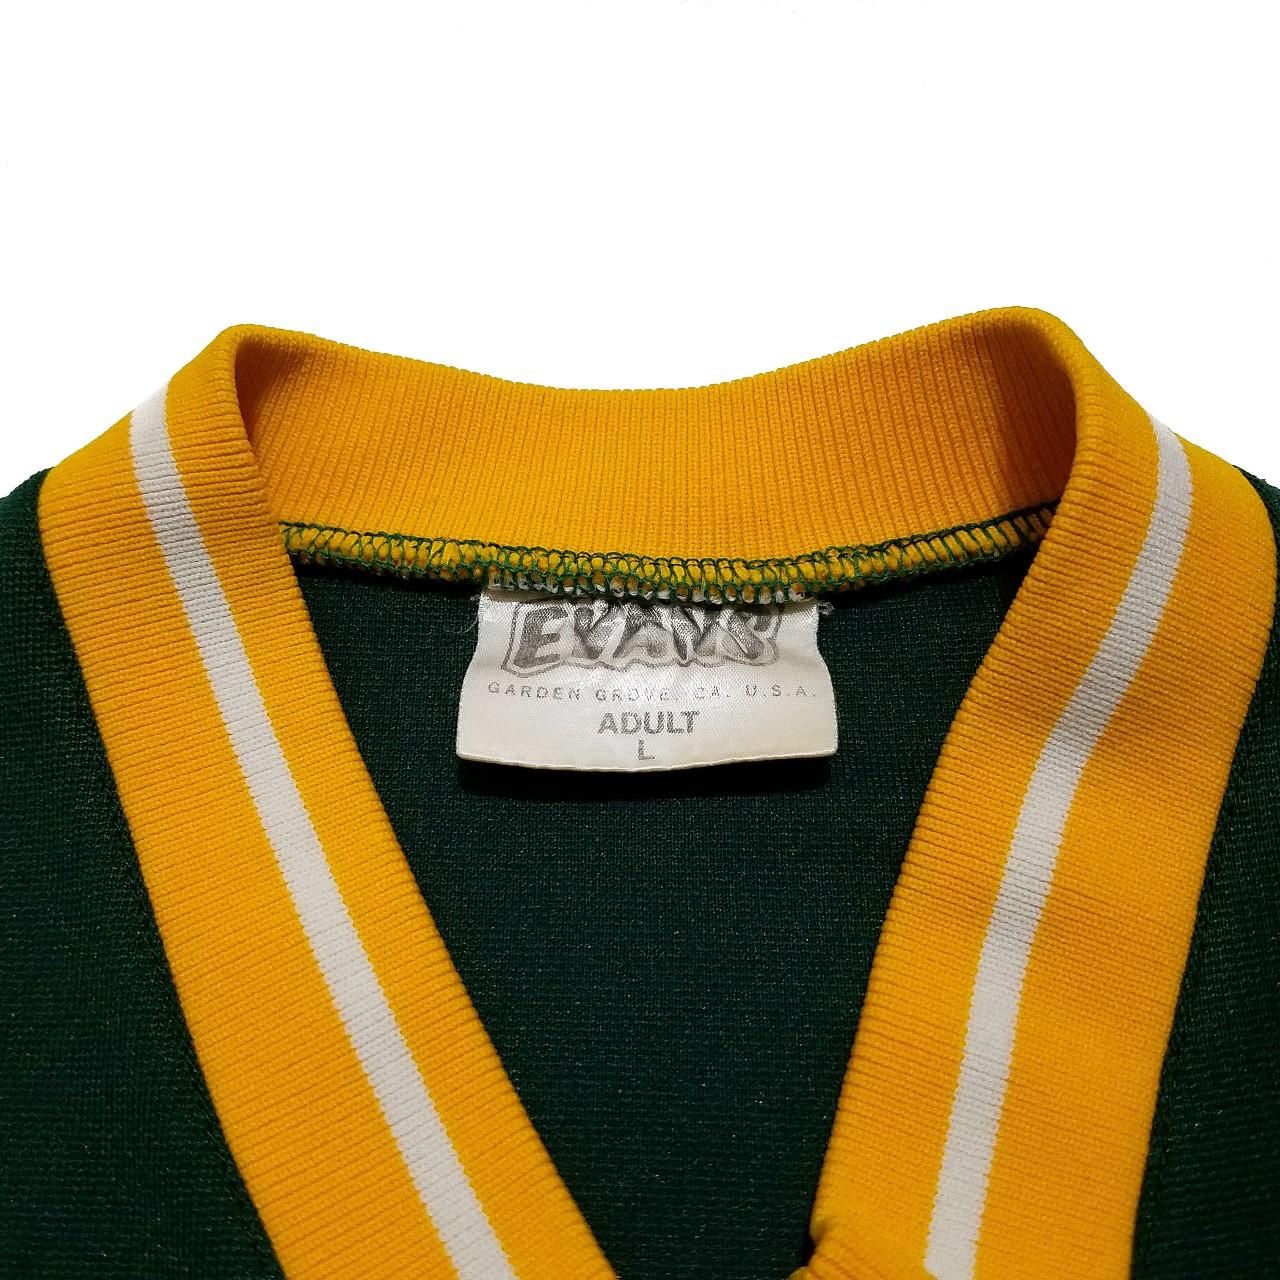 Oakland A's Jersey (Flawed) authentic, not a knock - Depop